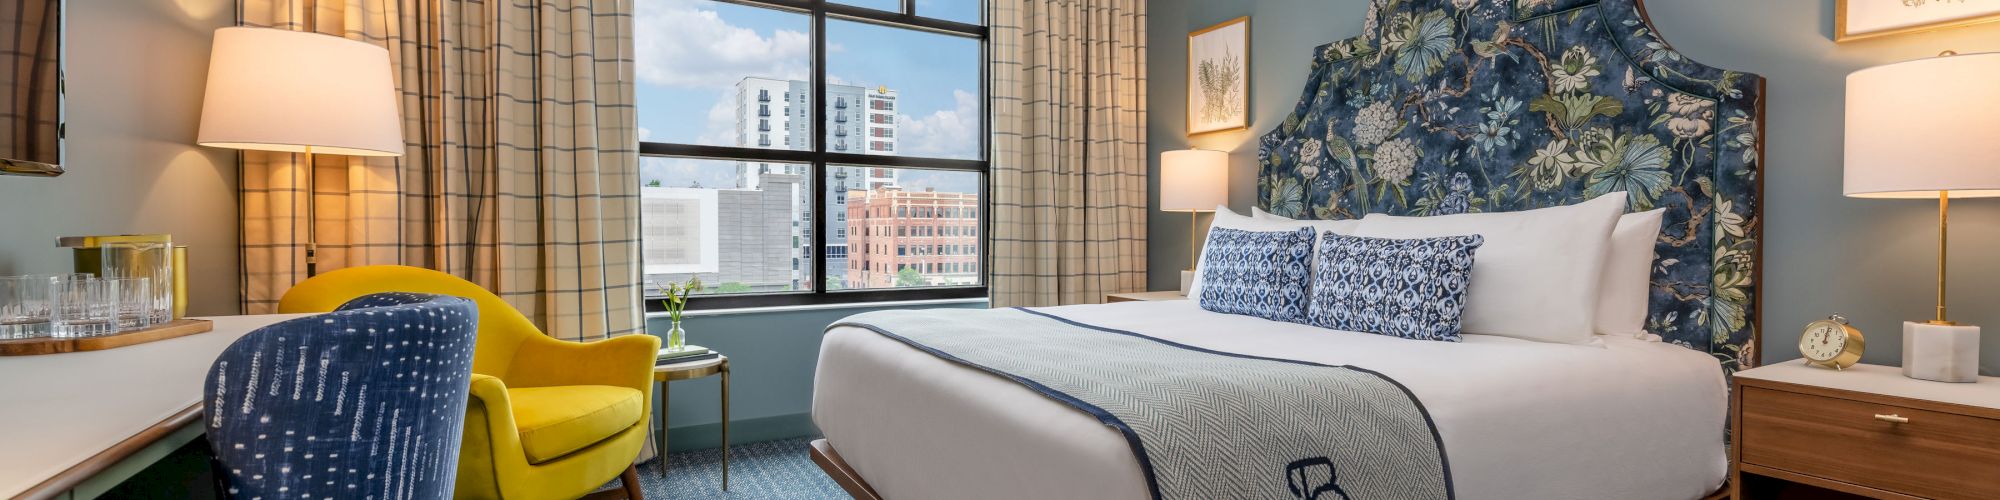 A stylish hotel room features a bed, two chairs, desk, lamps, and framed art. A window offers a city view.